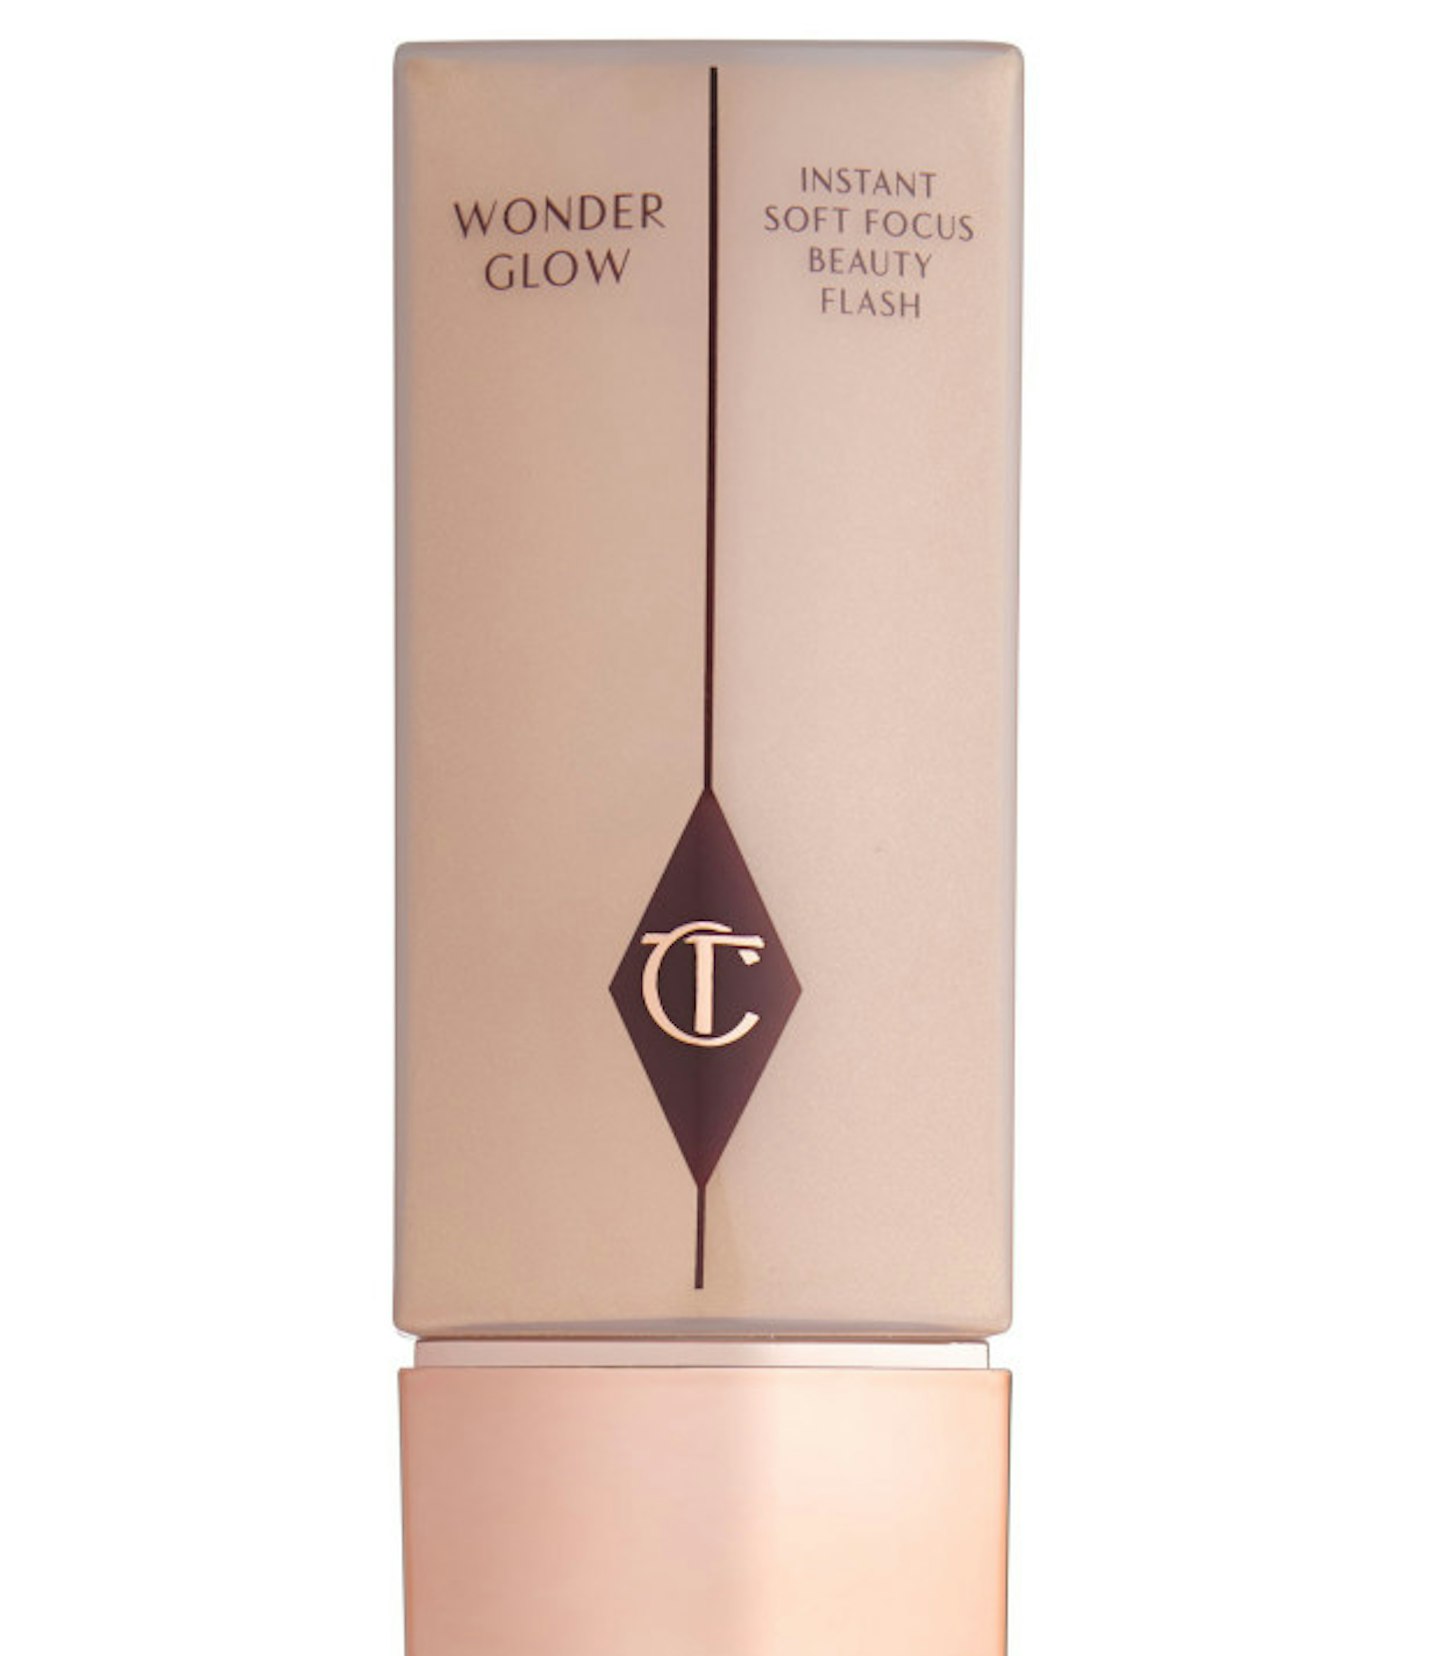 Next up, Charlotte blended this miracle primer to give Mrs C a gorgeous glow